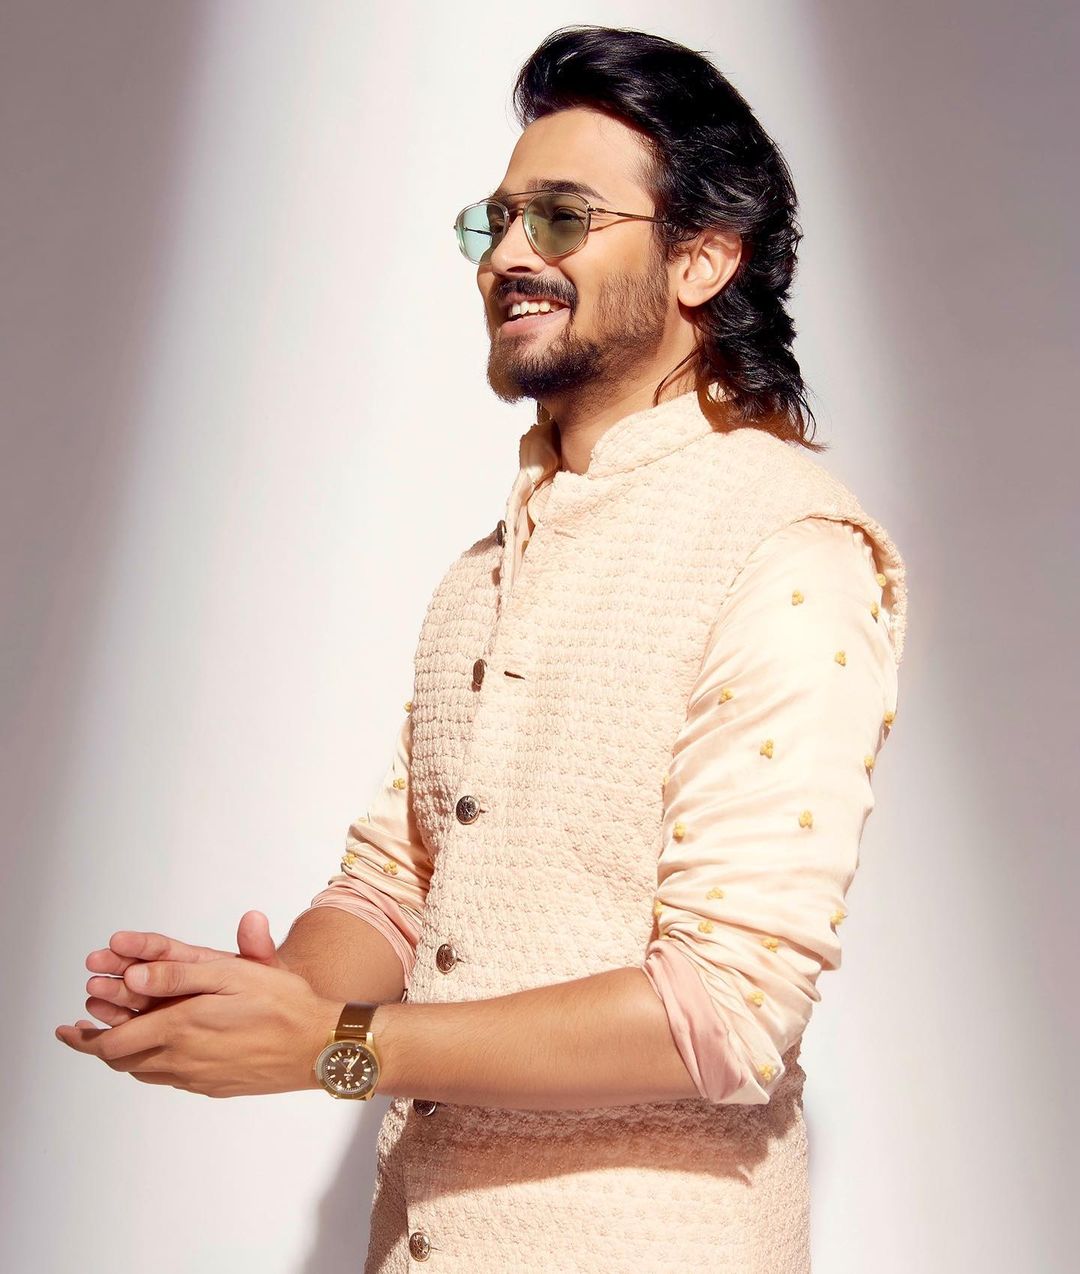 Ashish Chanchlani or Bhuvan Bam: Who looks more stylish in traditional outfit? 4509